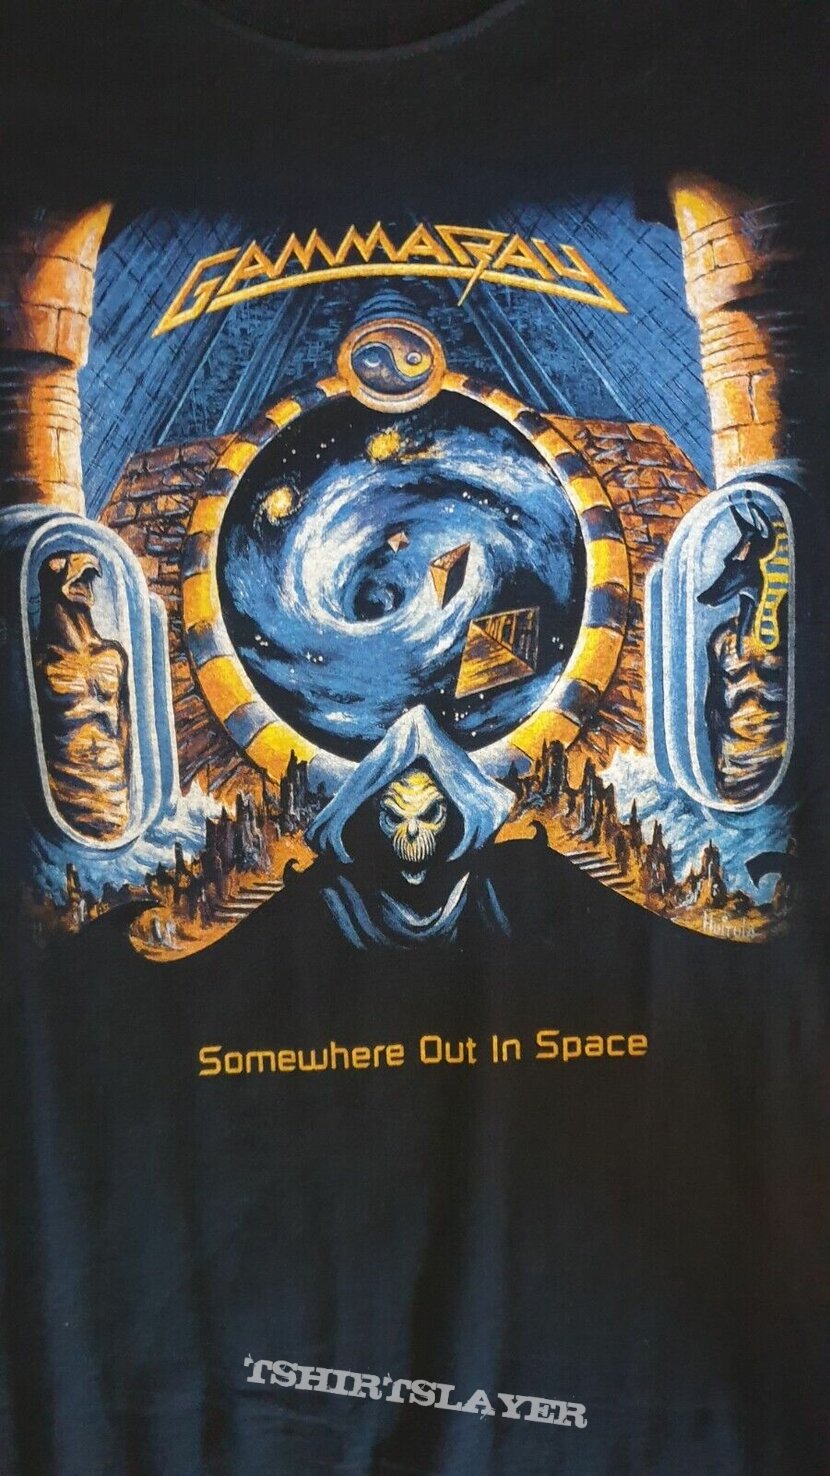 GAMMA RAY somewhere out in space T SHIRT